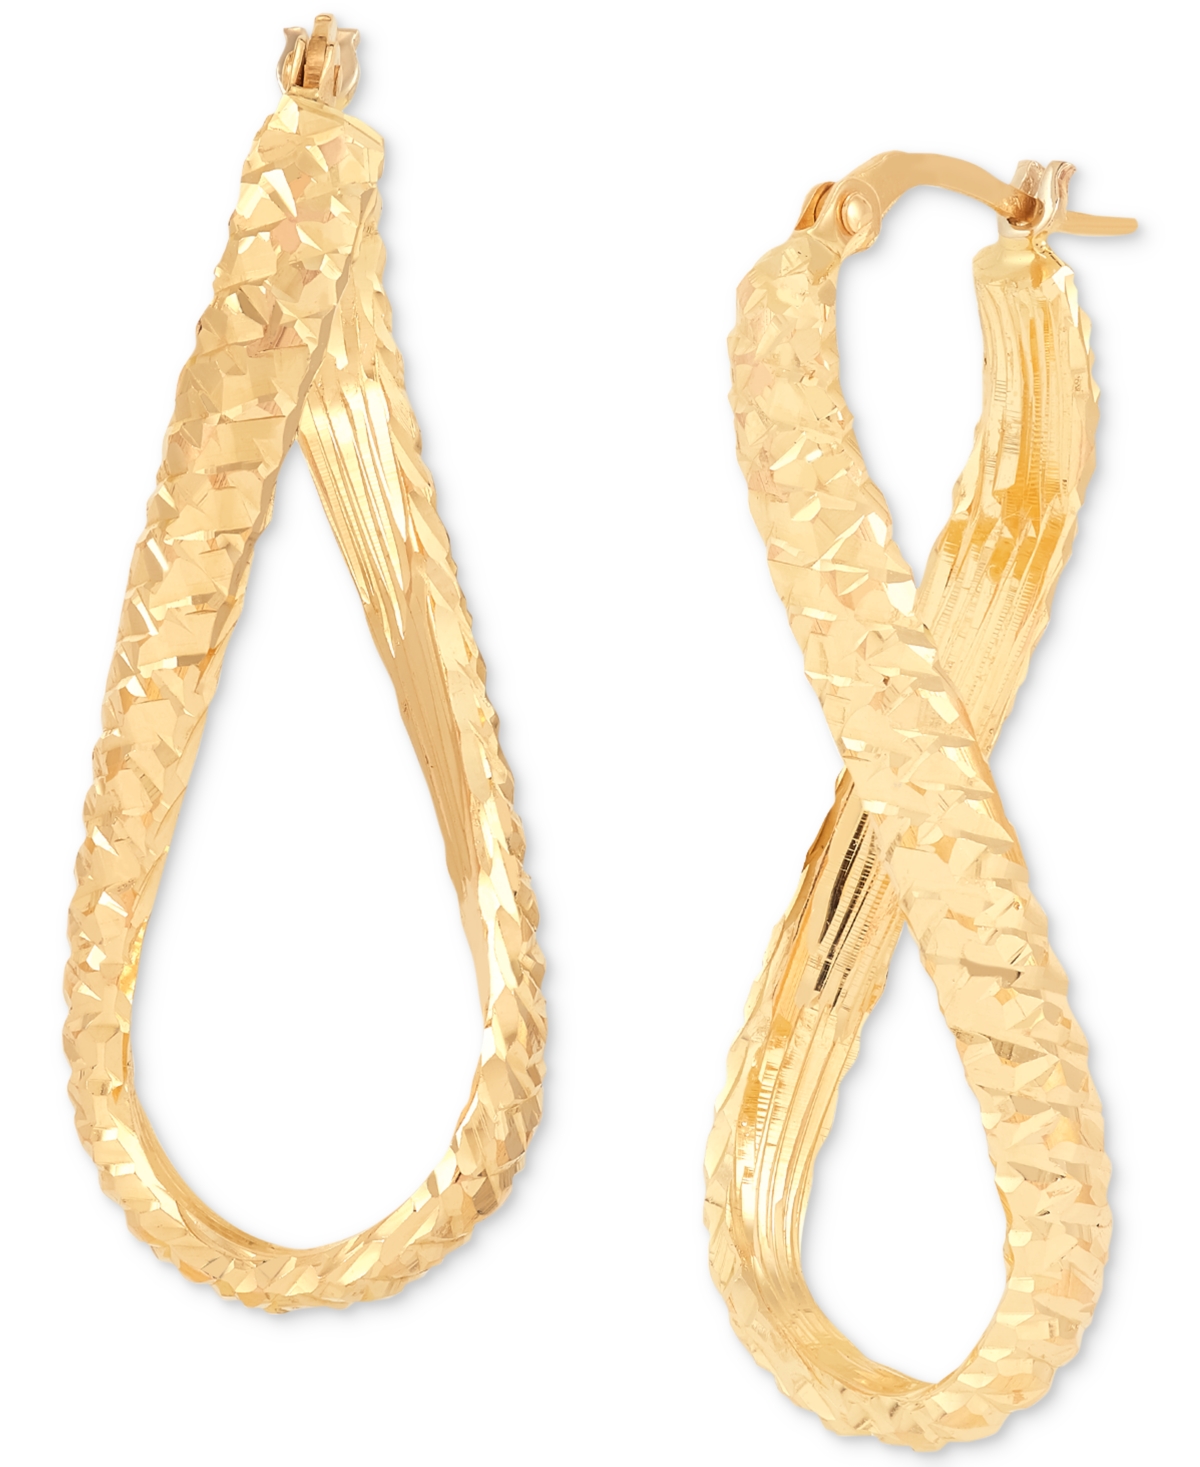 Textured Infinity Style Hoop Earrings in 10k Gold - Yellow Gold